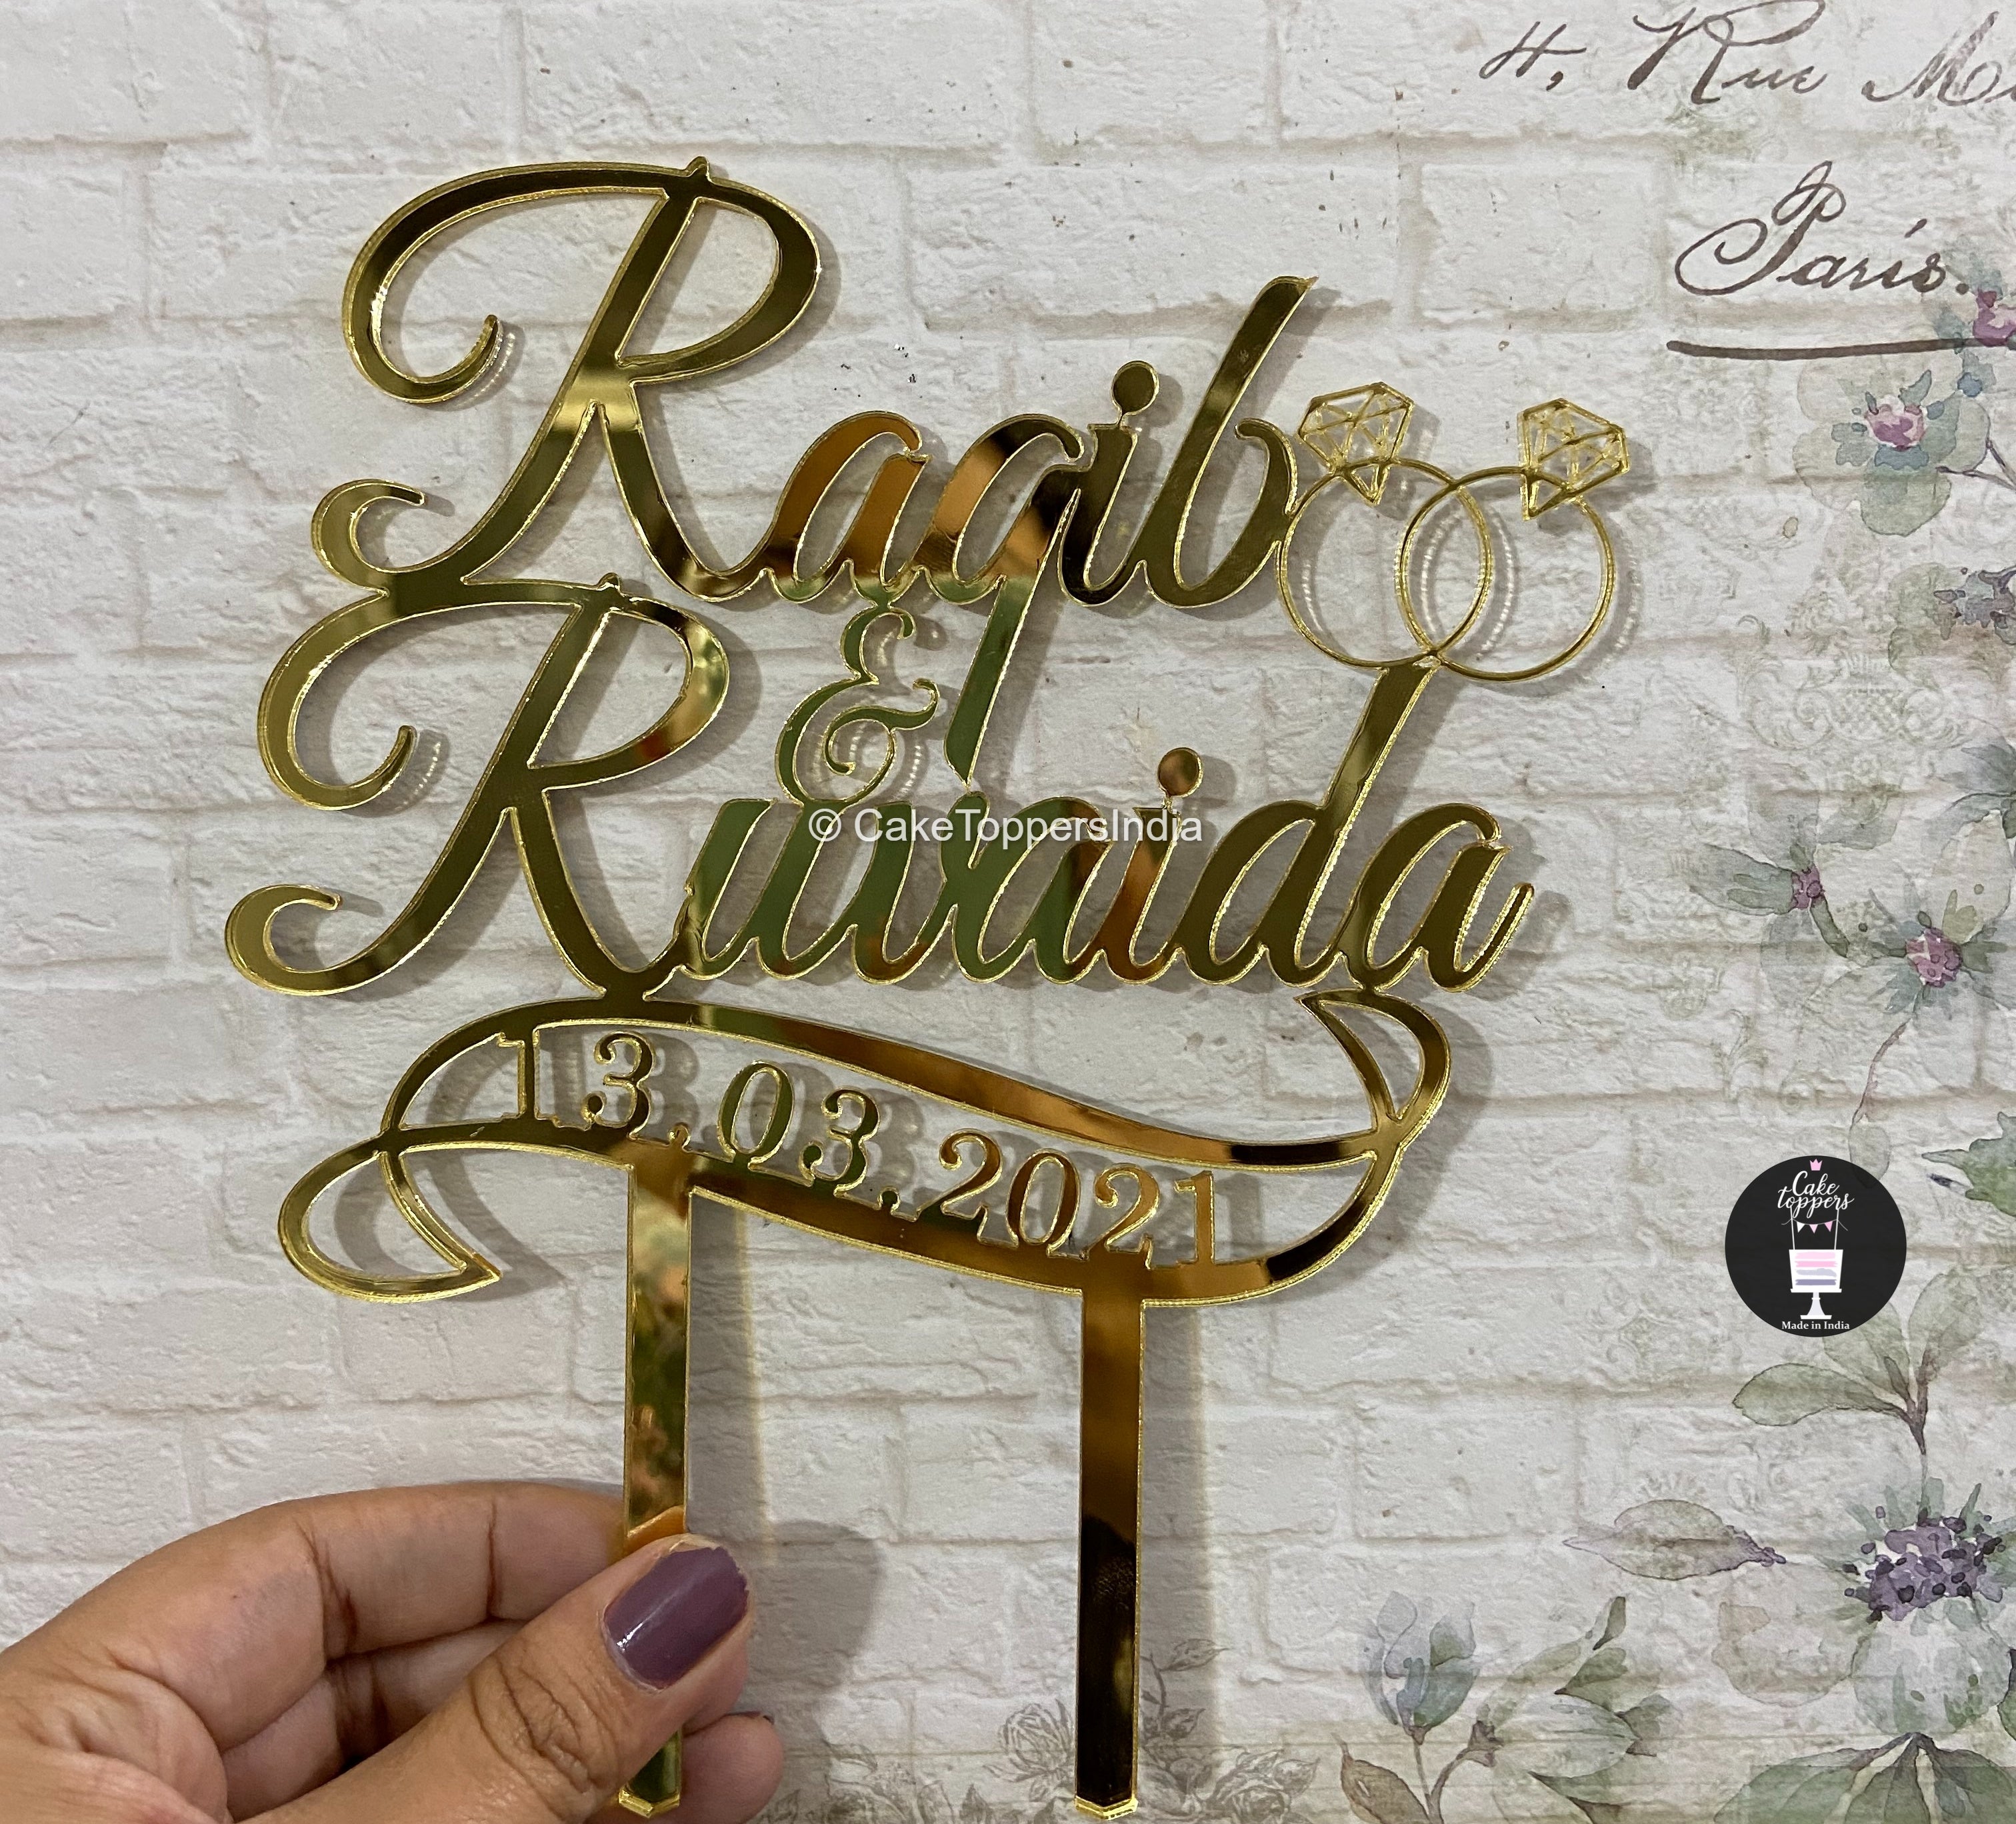 Personalised / Customised Engagement We Said Yes Cake topper with Date – Cake  Toppers India